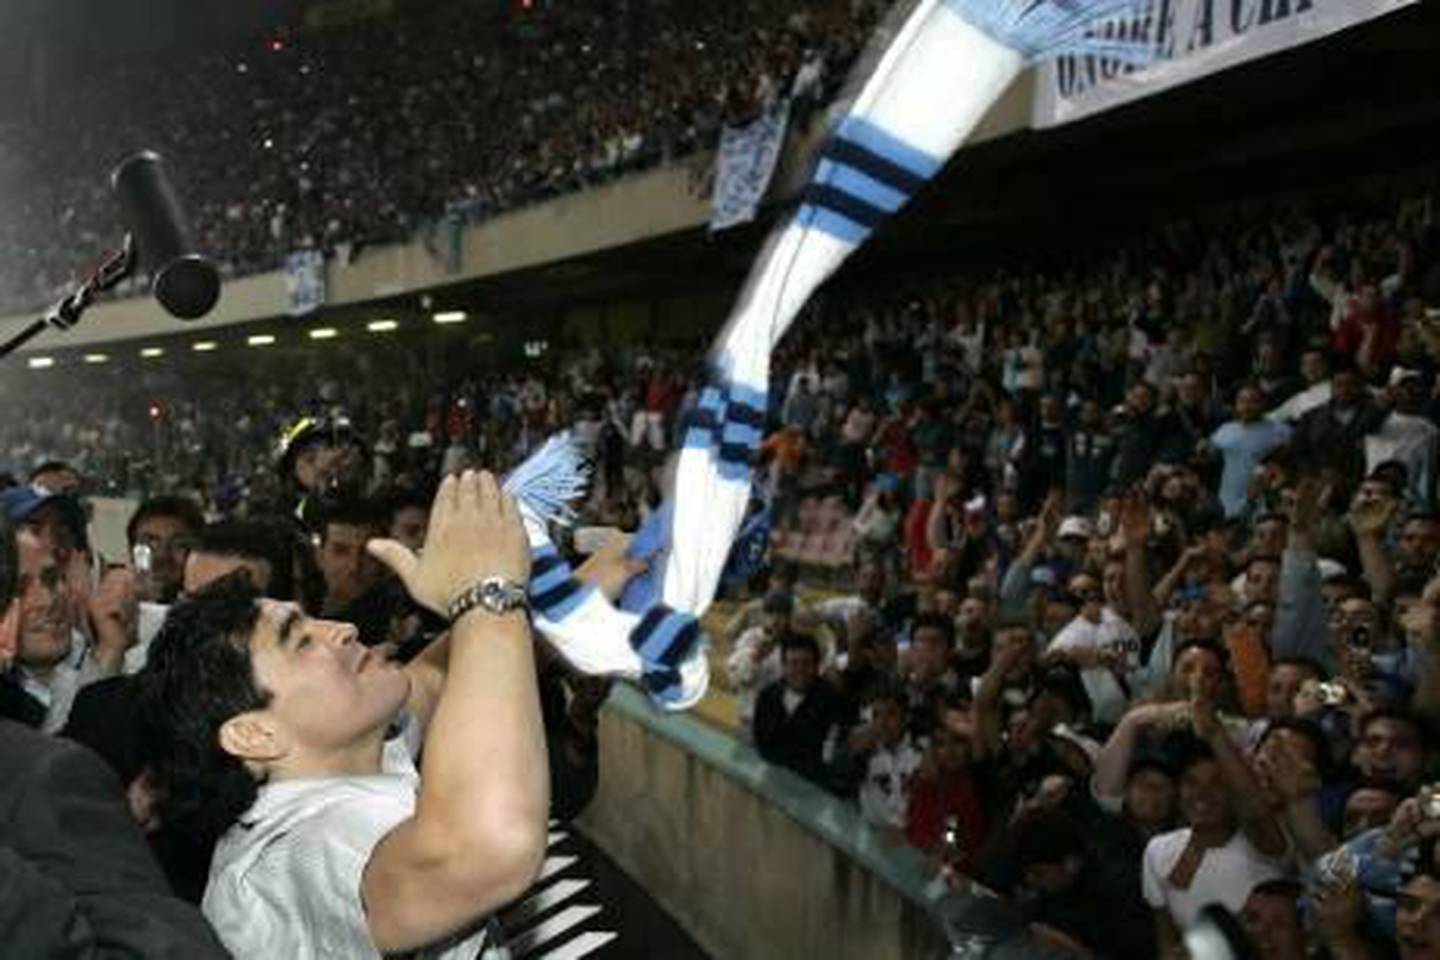 Former Argentine soccer star Diego Armando Maradona blows kisses to his fans in the San Paolo stadium in Naples, southern Italy, Thursday, June 9, 2005. Maradona returned to Naples after a 14-year absence to attend former Napoli teammate Ciro Ferrara's farewell match at San Paolo stadium.(AP Photo/Salvatore Laporta)